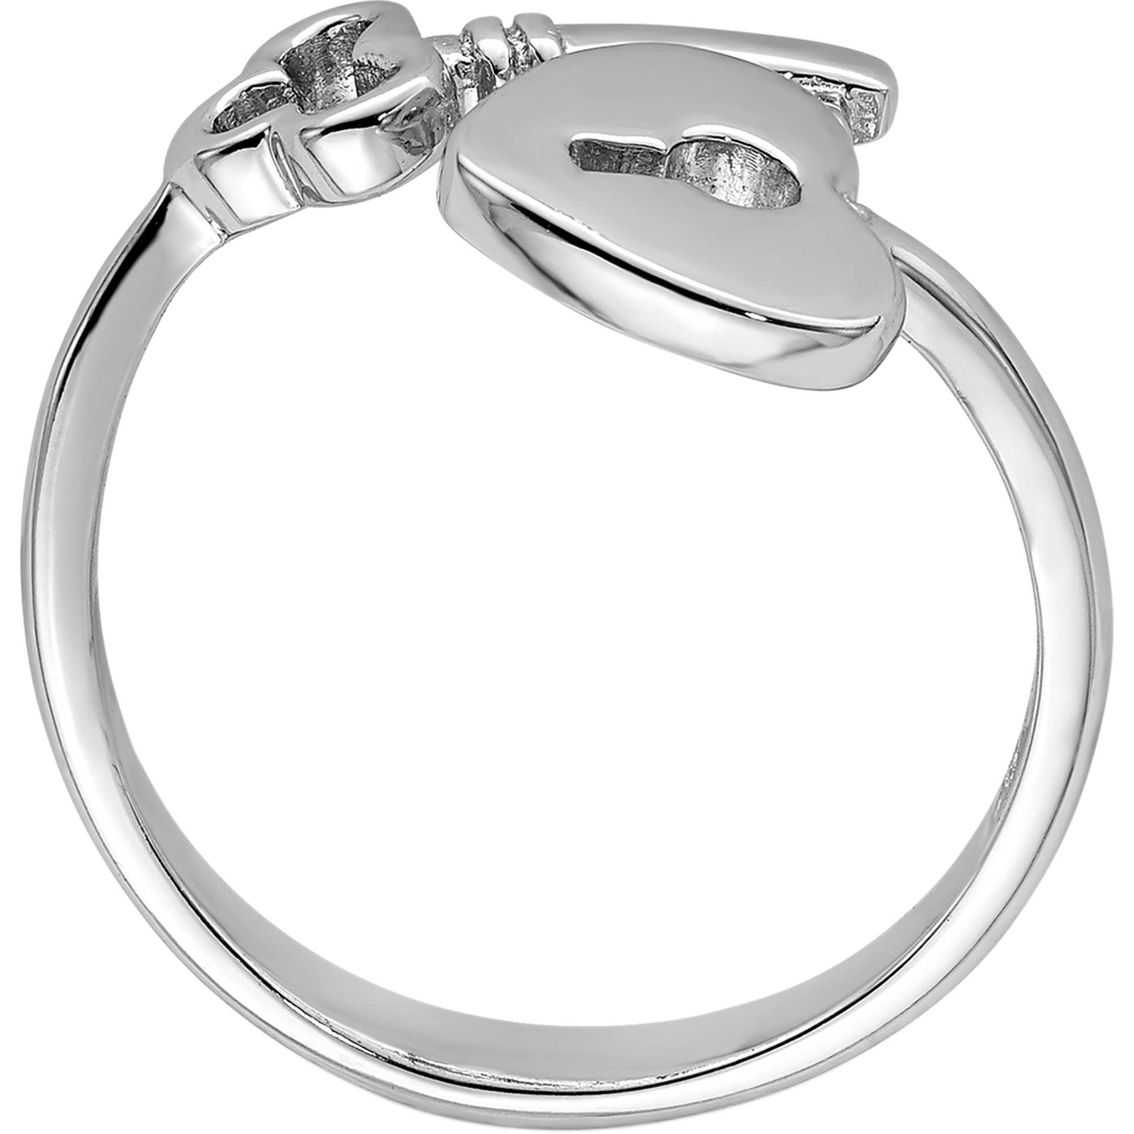 Rhodium Over Sterling Silver Heart Lock and Key Toe Ring - Image 3 of 3